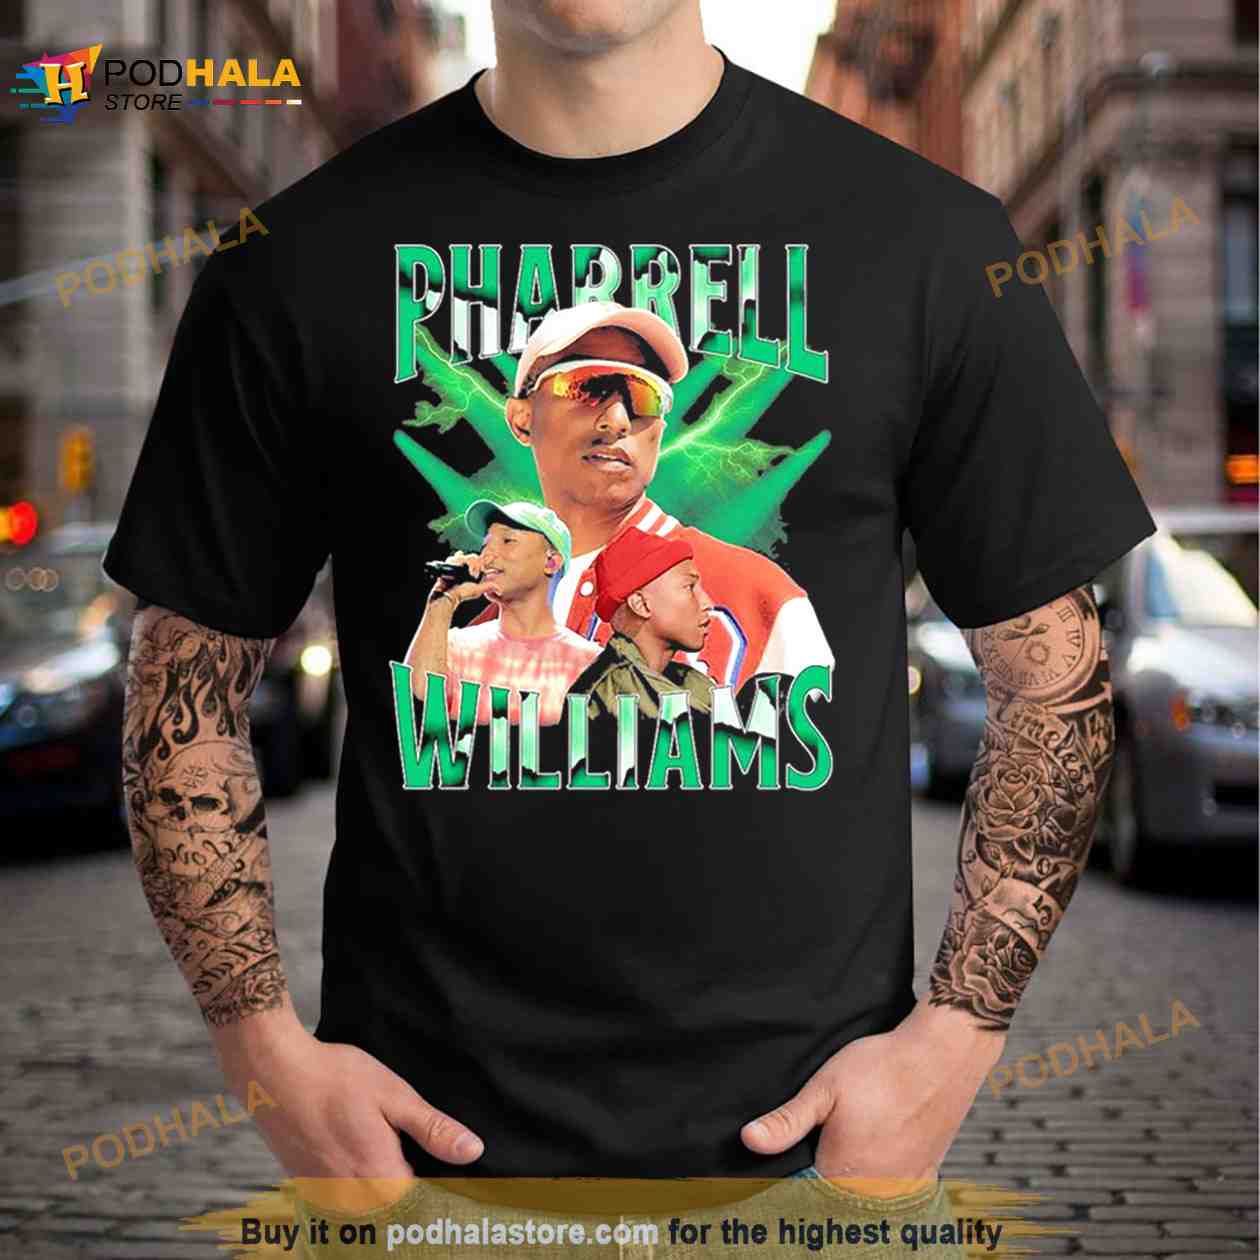 Pharrell Williams 2023 Shirt - Bring Your Ideas, Thoughts And Imaginations  Into Reality Today